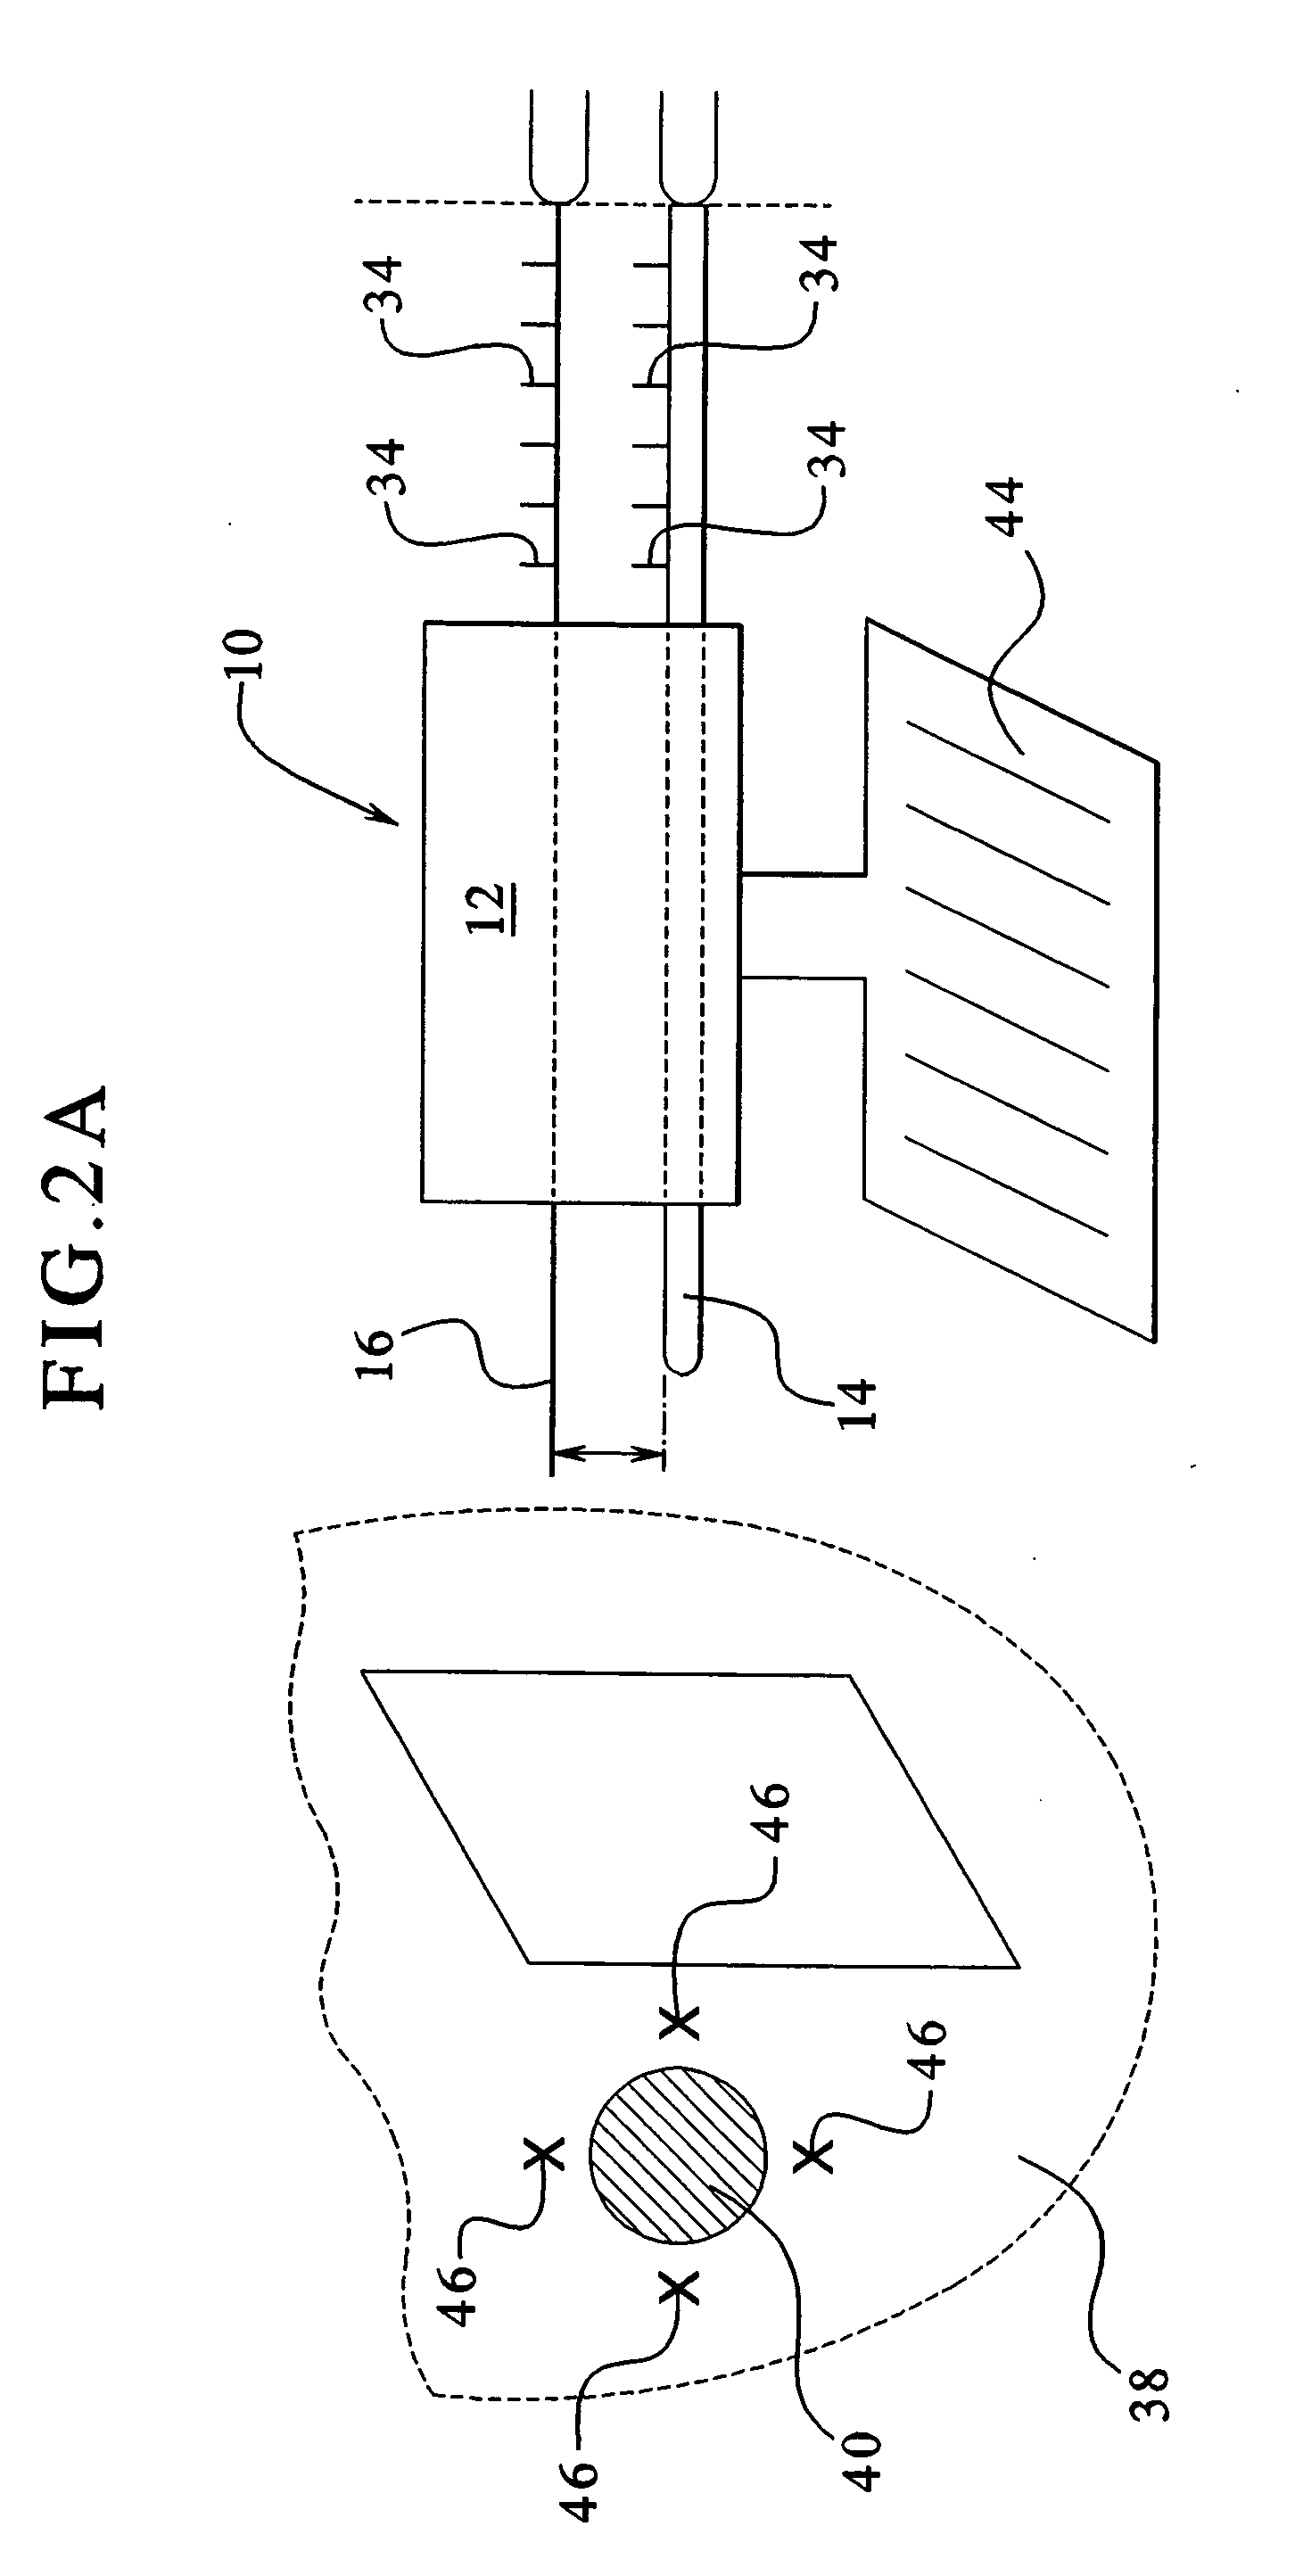 Apparatus and method for delivering ablative laser energy and determining the volume of tumor mass destroyed